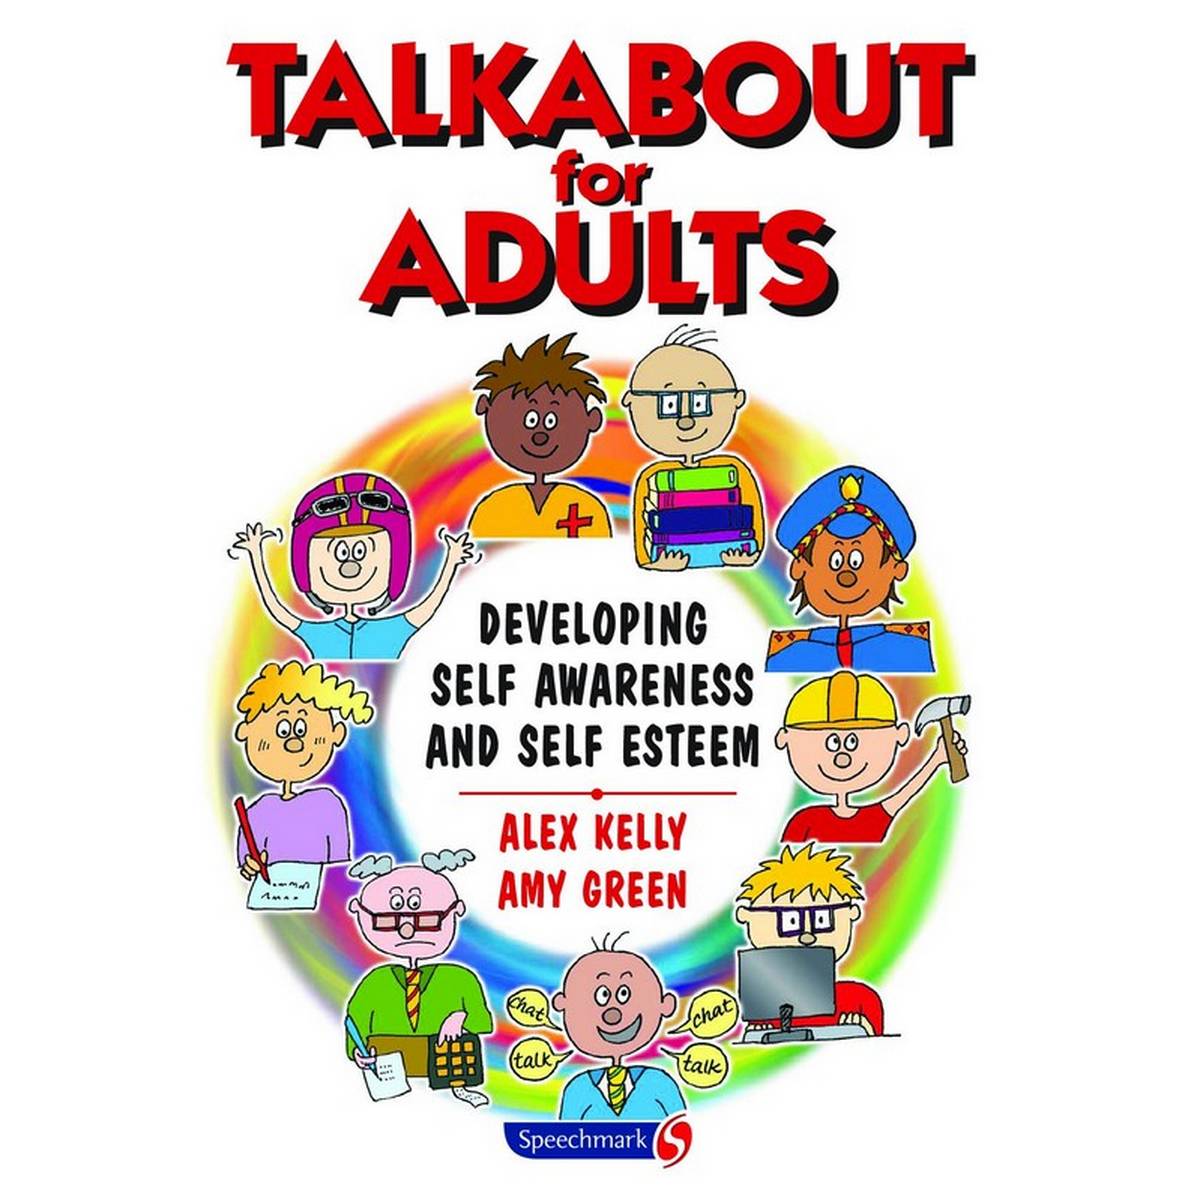 Talkabout for Adults - Developing Self Awareness and Self Esteem